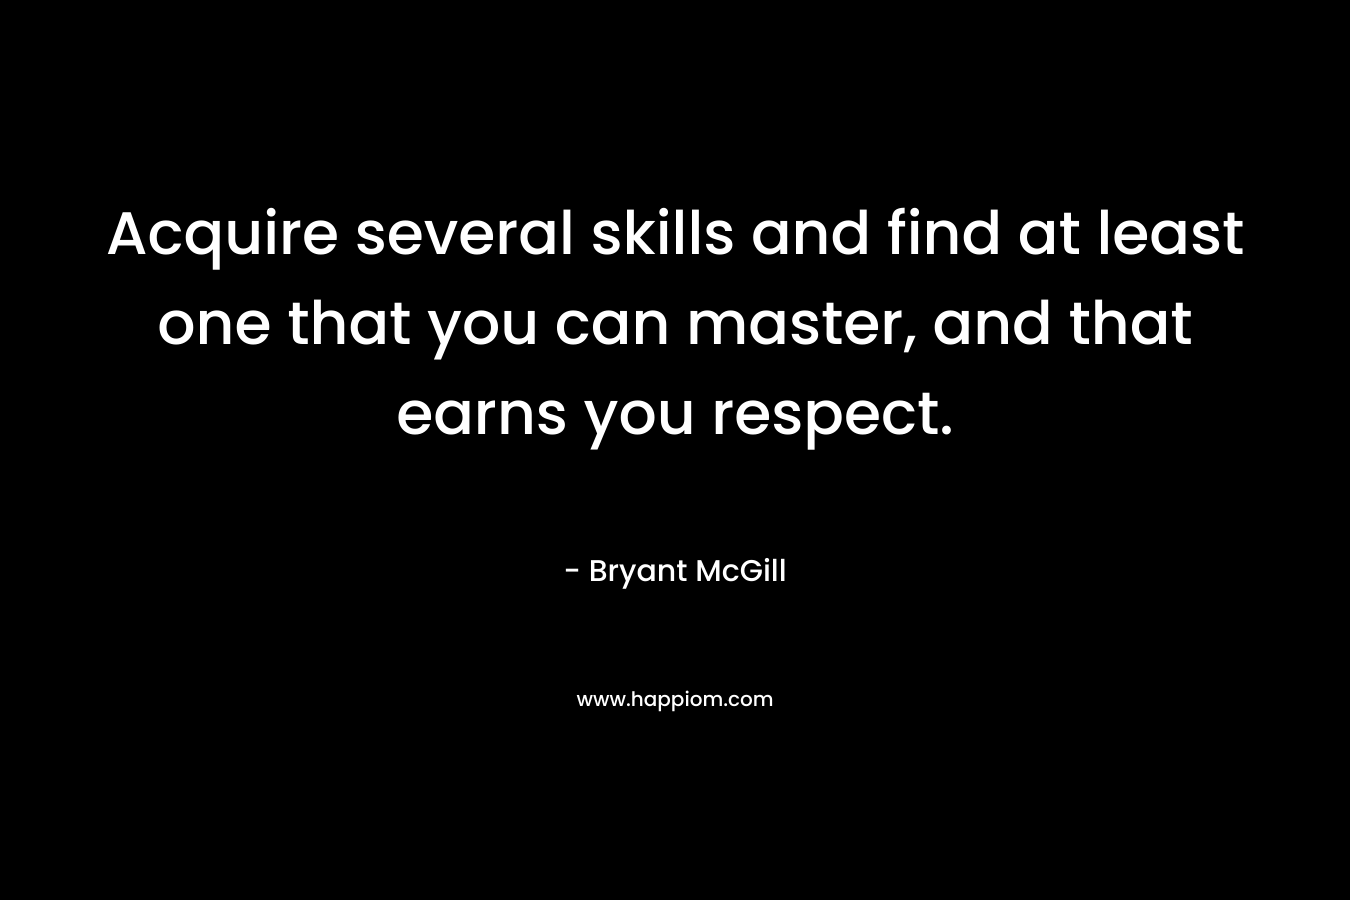 Acquire several skills and find at least one that you can master, and that earns you respect.